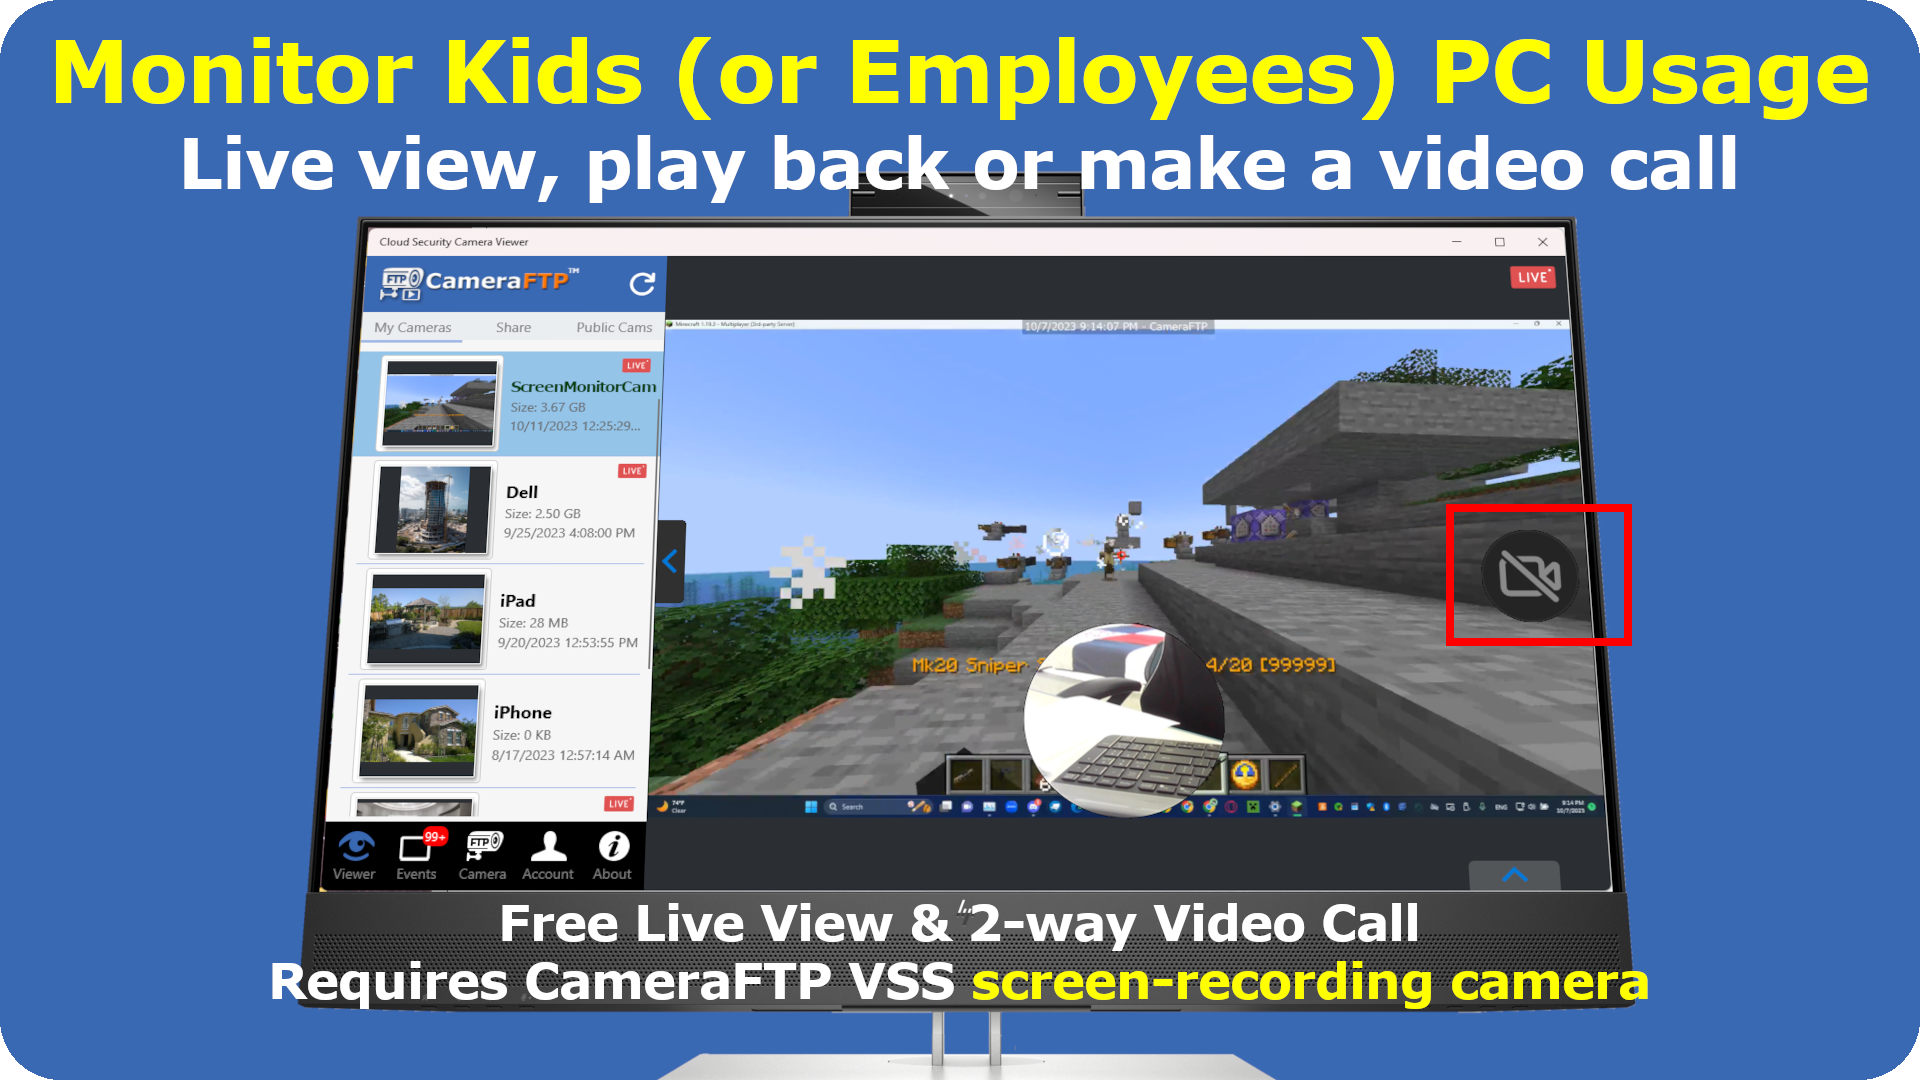 Monitor kids or employees PC usage if you use CameraFTP VSS's screen-recording camera. It can efficiently record audio and video continuously. You can view or play back from anywhere, or make a video call.